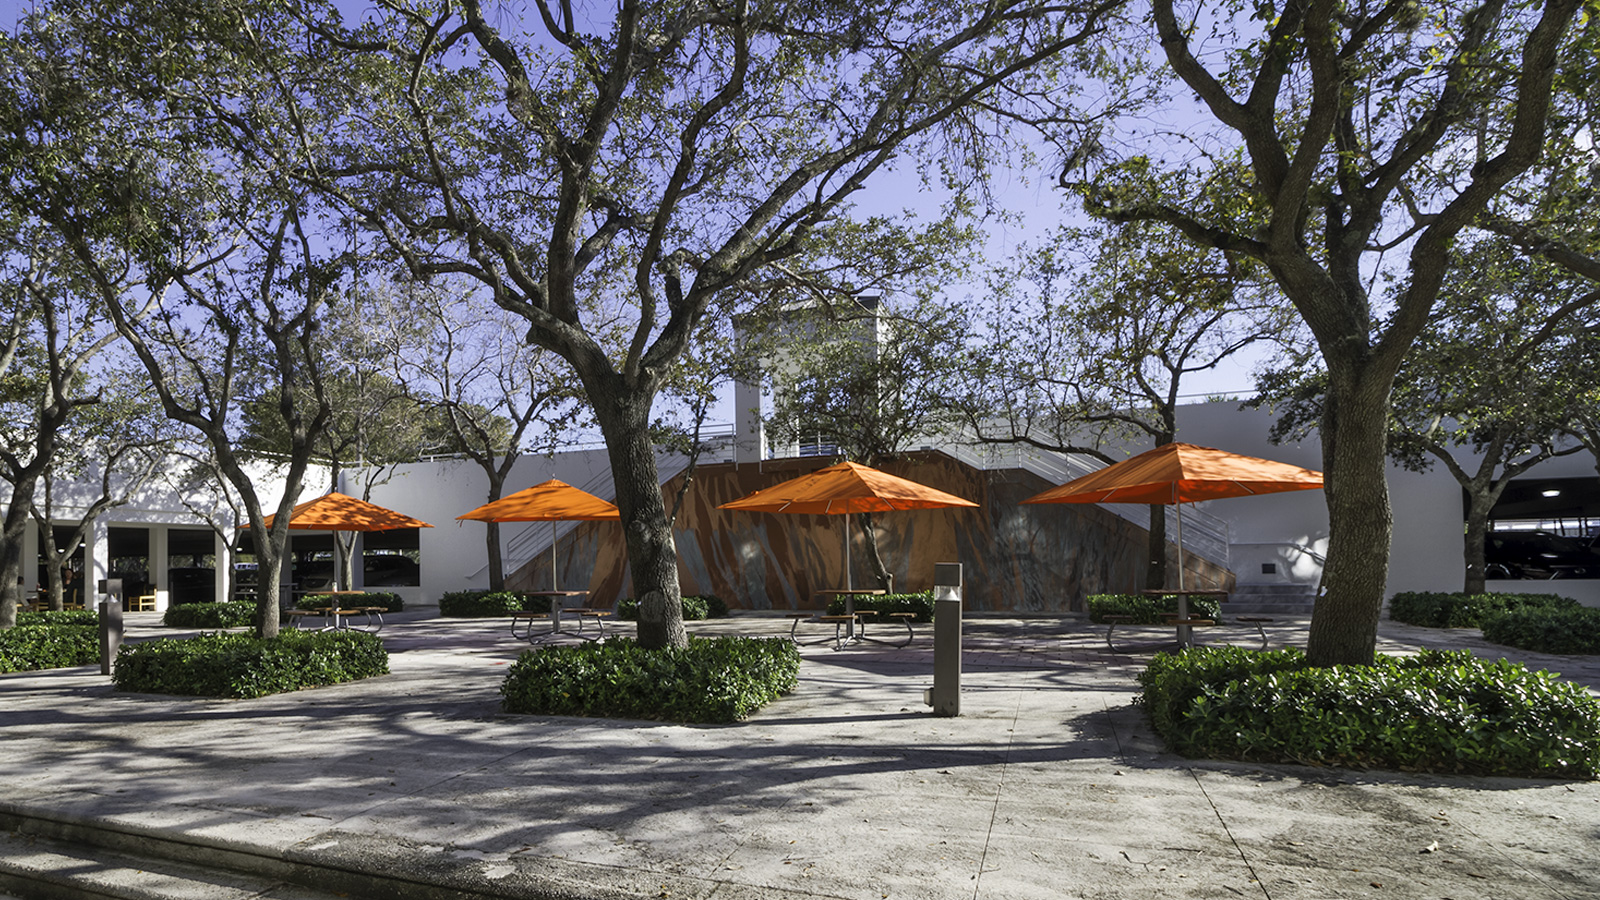 Reclad Dining Facilities Featuring Wi-Fi–Enabled Outdoor Seating